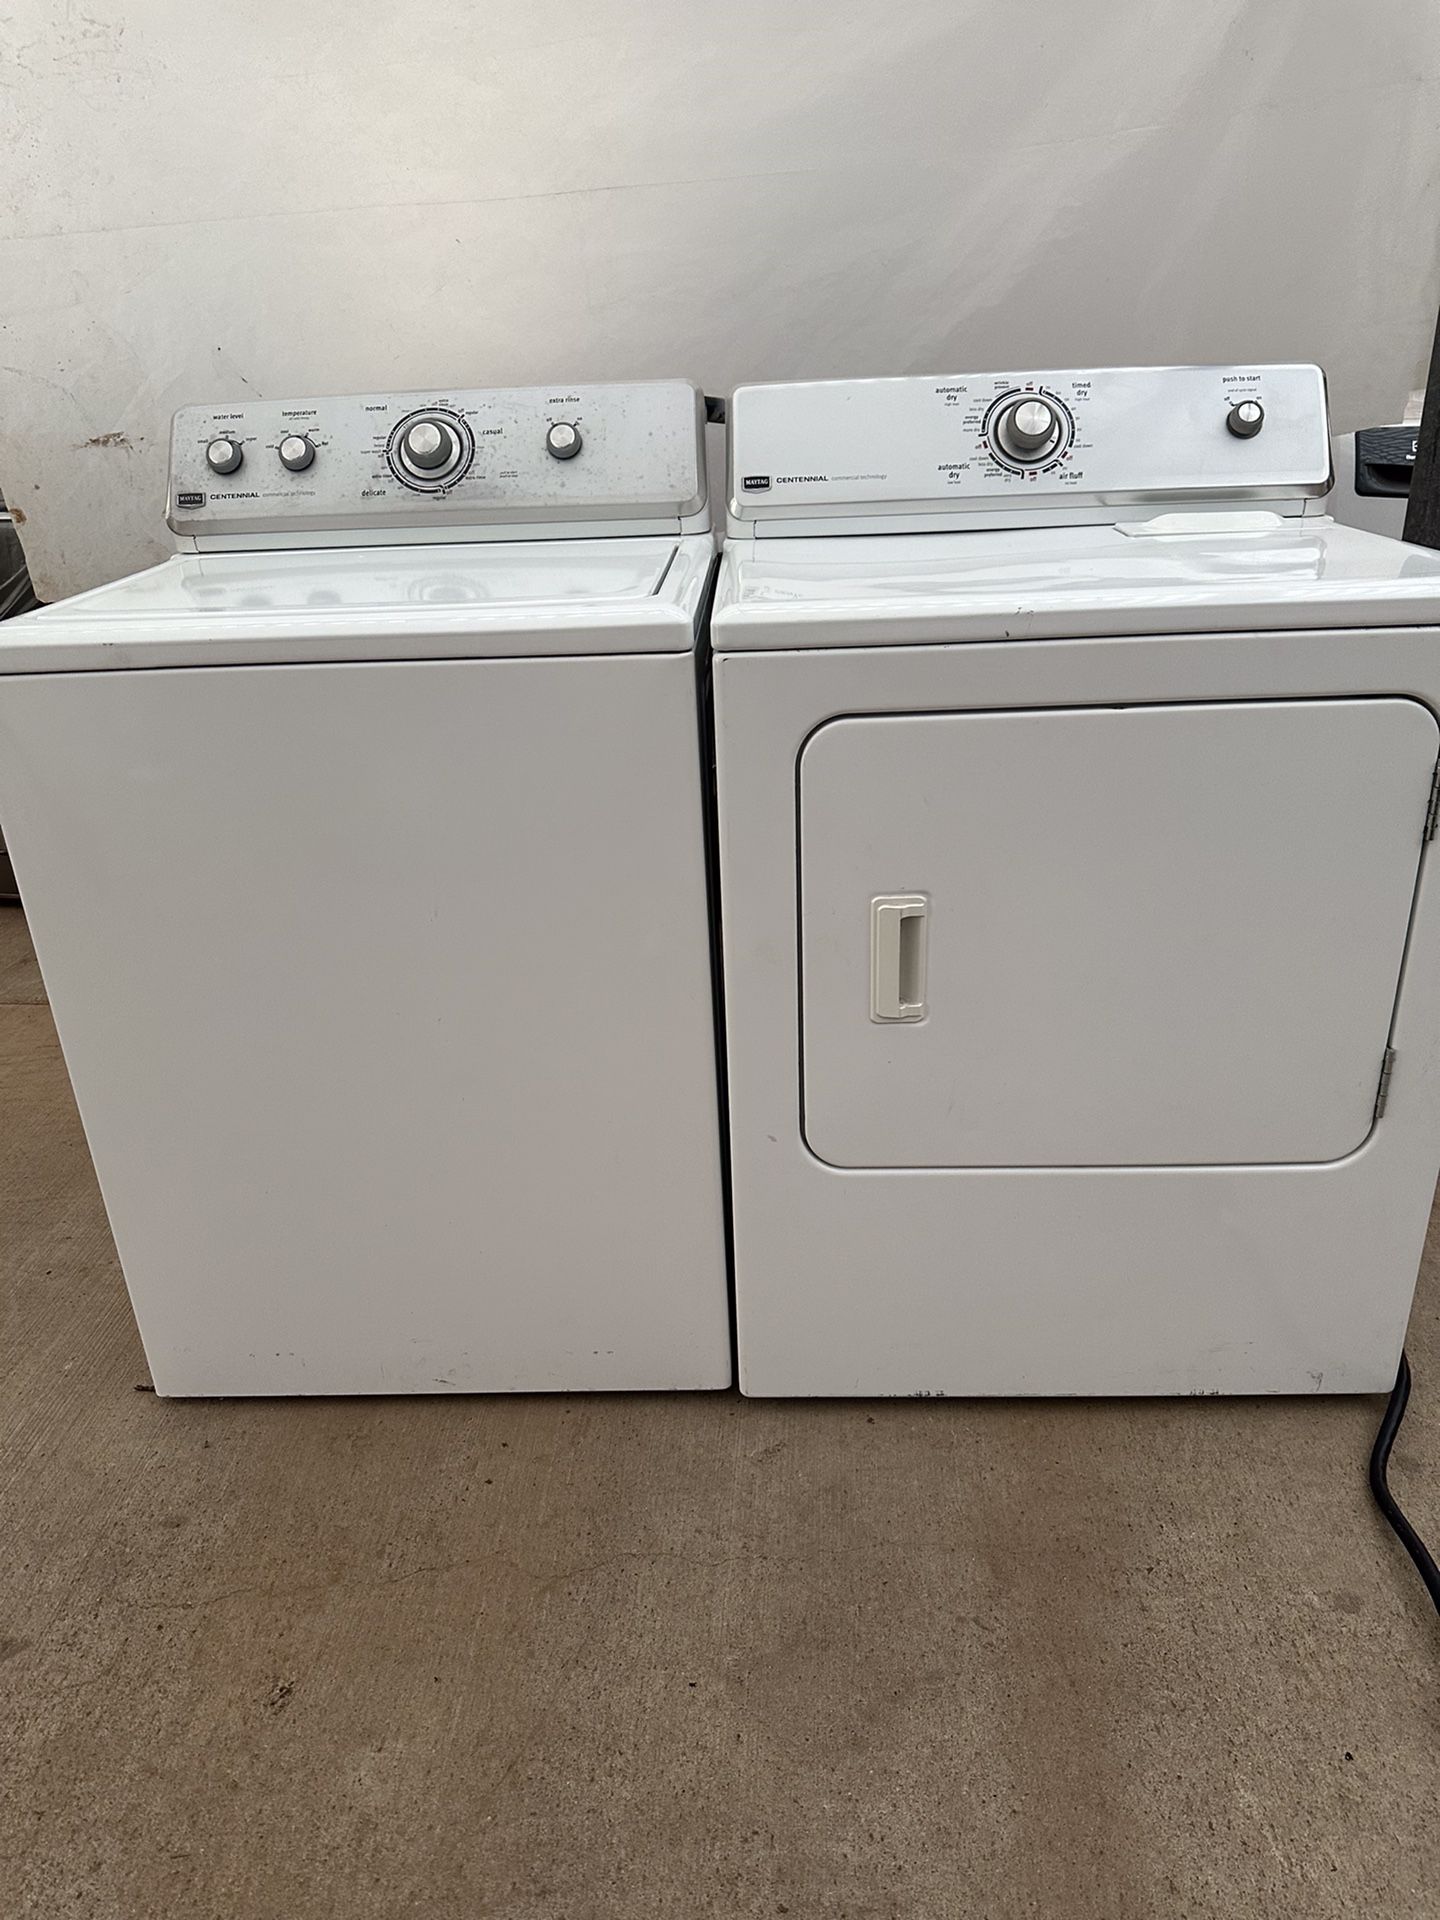 Maytag Washer And Dryer Laundry Set 